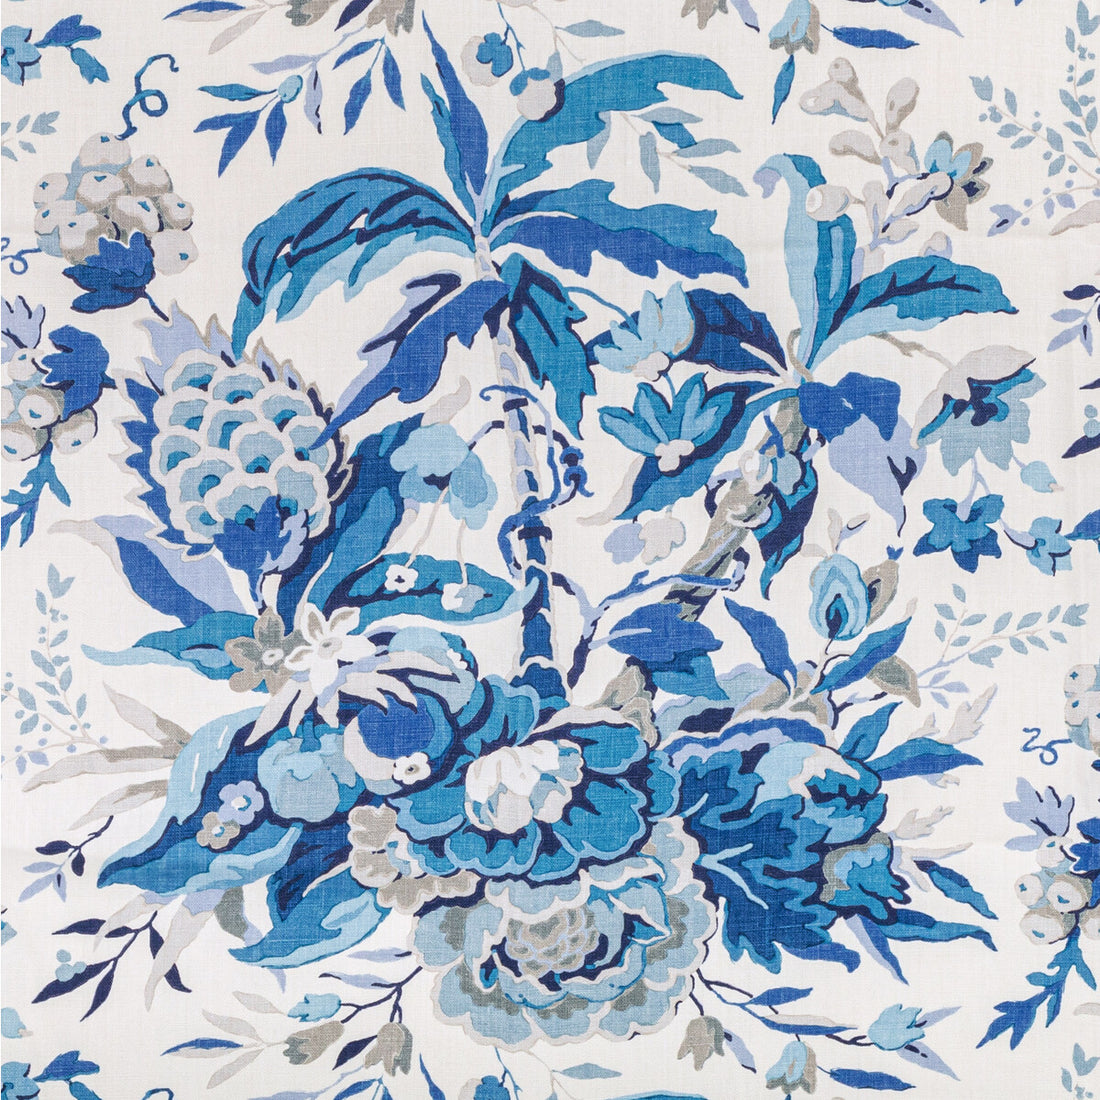 Horseshoe Bay fabric in blue/ivory color - pattern 8015108.5.0 - by Brunschwig &amp; Fils in the Majorelle collection